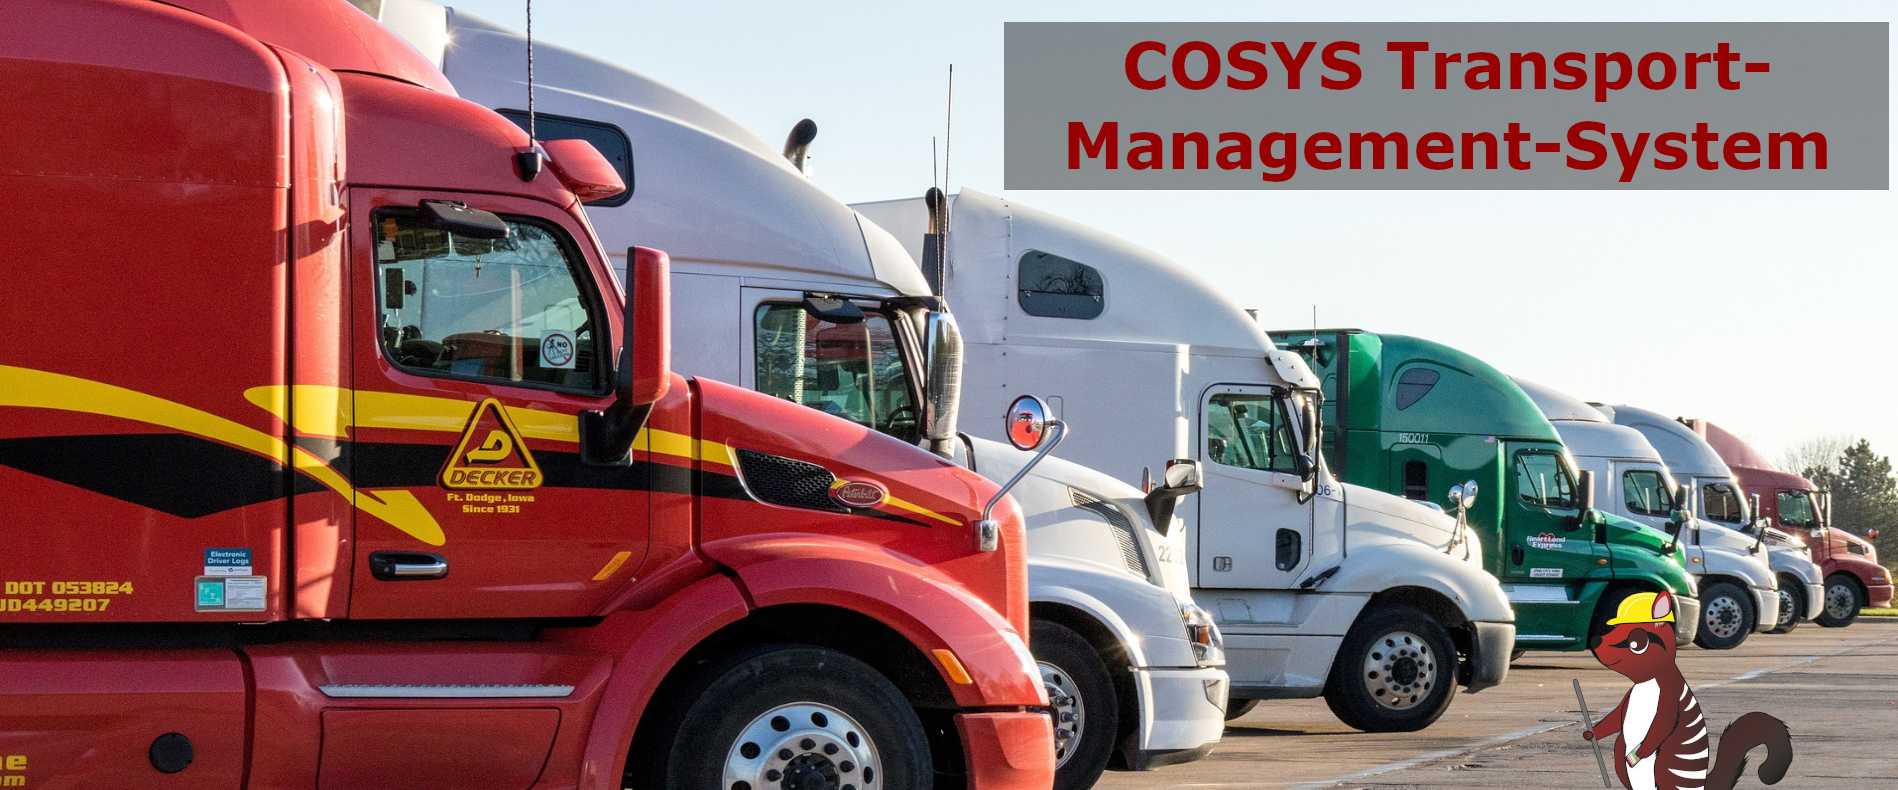 COSYS Transport-Management-System